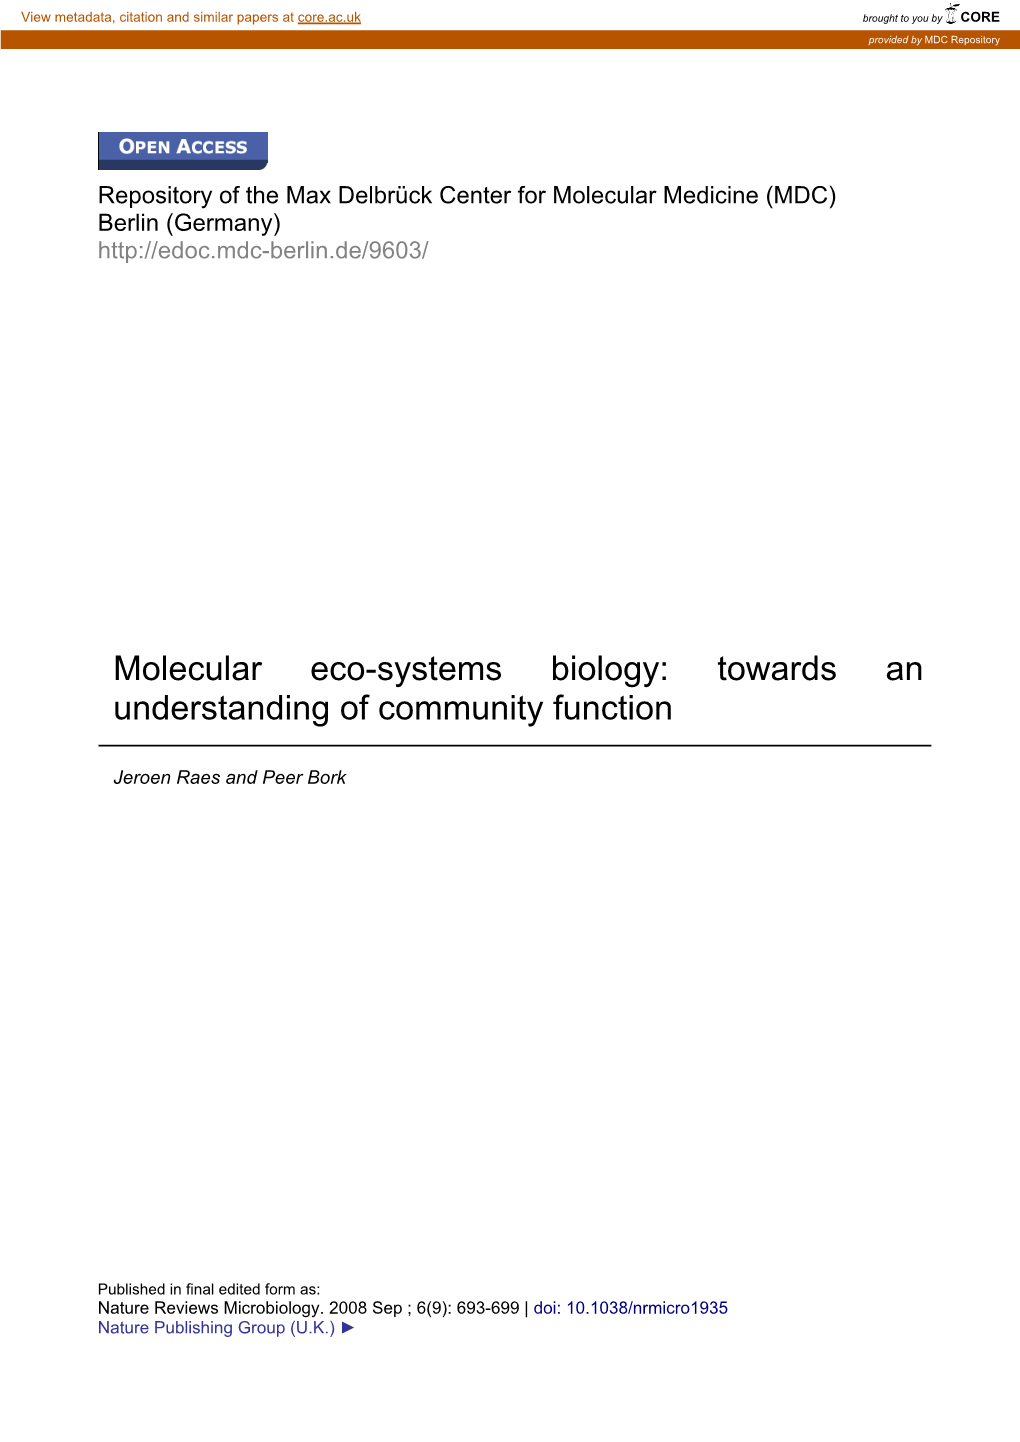 Molecular Eco-Systems Biology: Towards an Understanding of Community Function